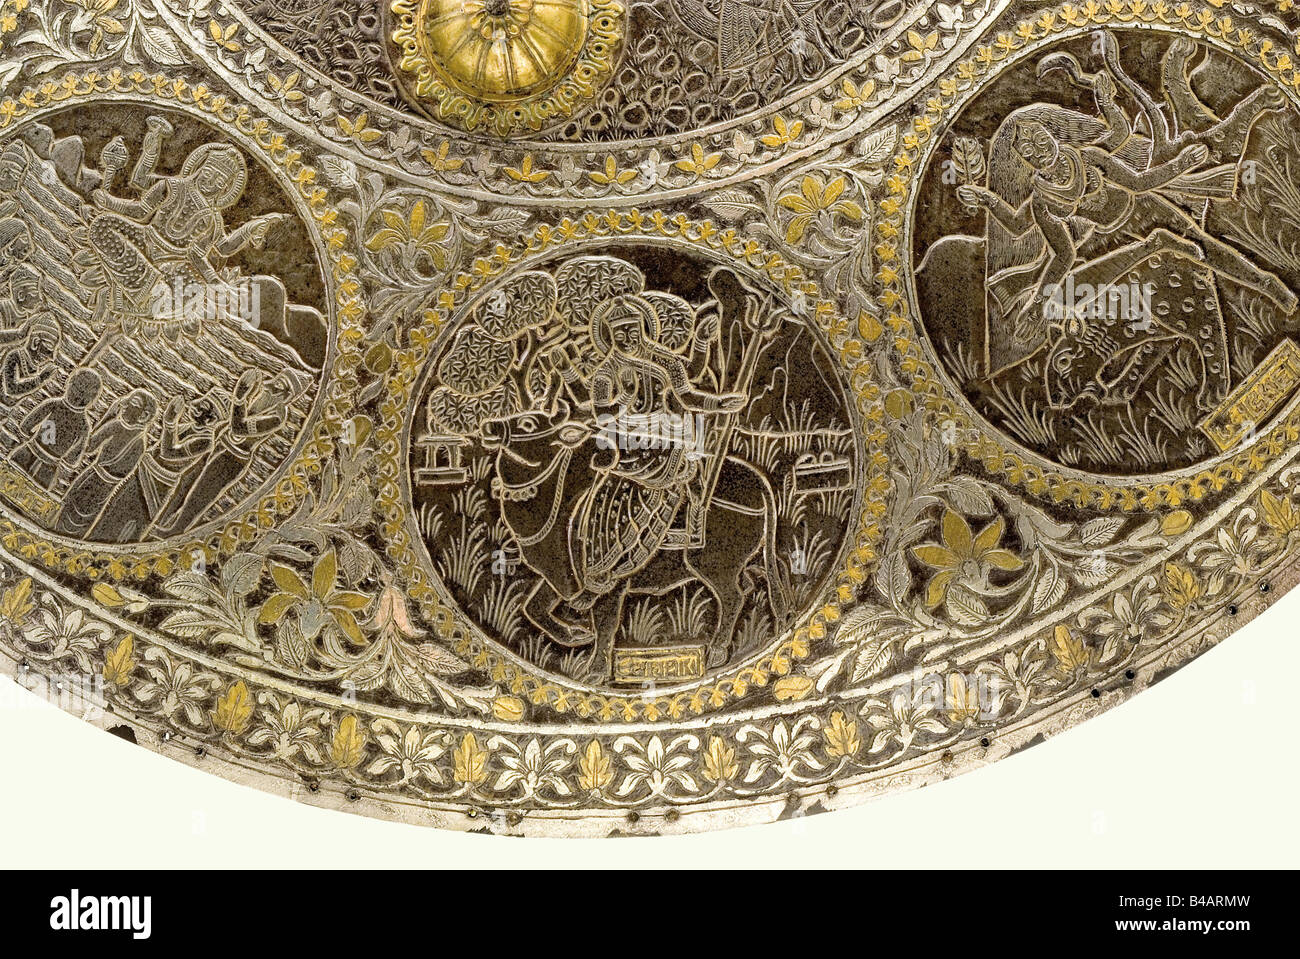 A splendid chiselled Indian shield, Jaipur, end of the 19th century. A slightly cambered shield. The entire surface is cut steel with rich gold and silver inlay. The centre bears the coat of arms of the Maharaja of Jaipur with the God Vishnu in a Sun Burst. There are four additional gods between the flower-shaped brass umbos, with a succession of nine surrounding circular cartouches bearing Hindi inscriptions. The surface is sealed with clear lacquer. On the back are four suspension rings with straps, a fist cushion (damaged), and brocaded lining sewnto the rim, Stock Photo